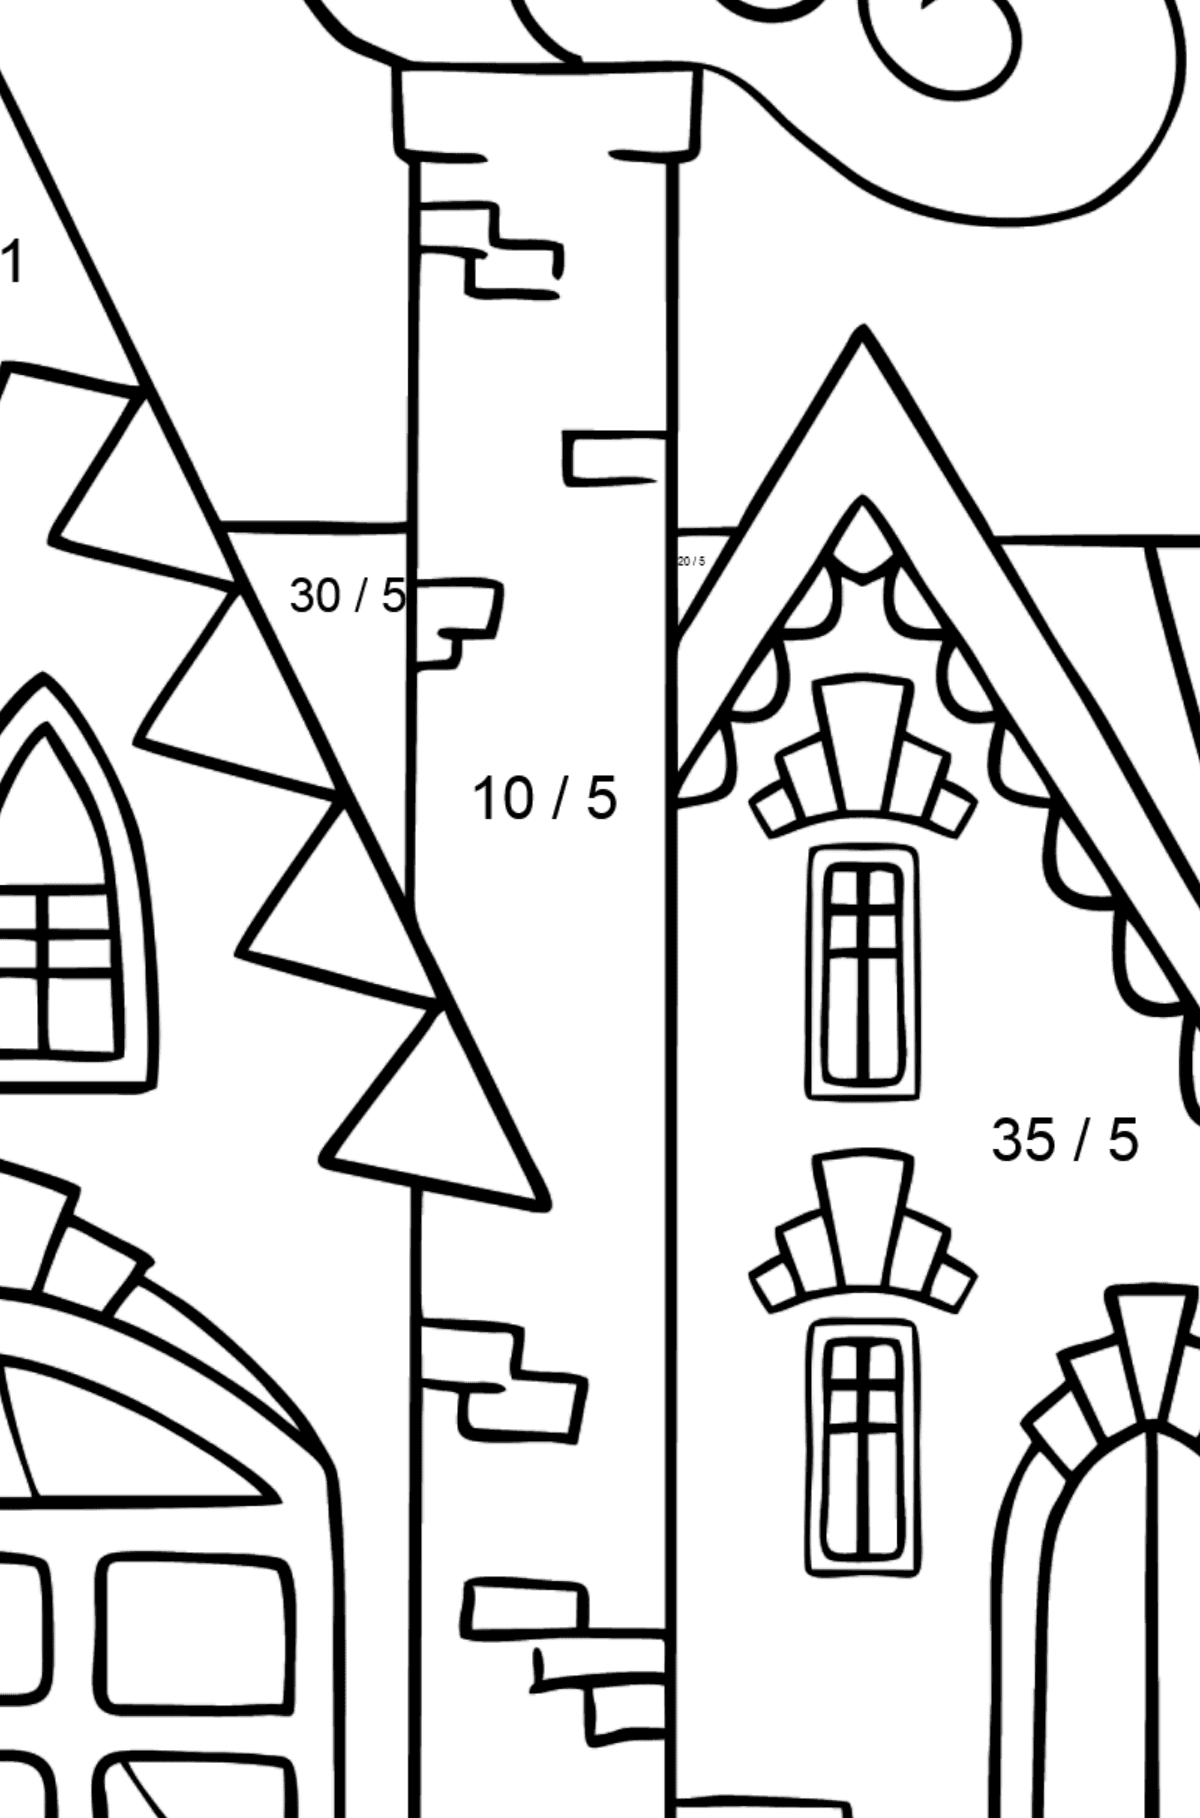 Simple Coloring Page - A Charming House - Math Coloring - Division for Kids